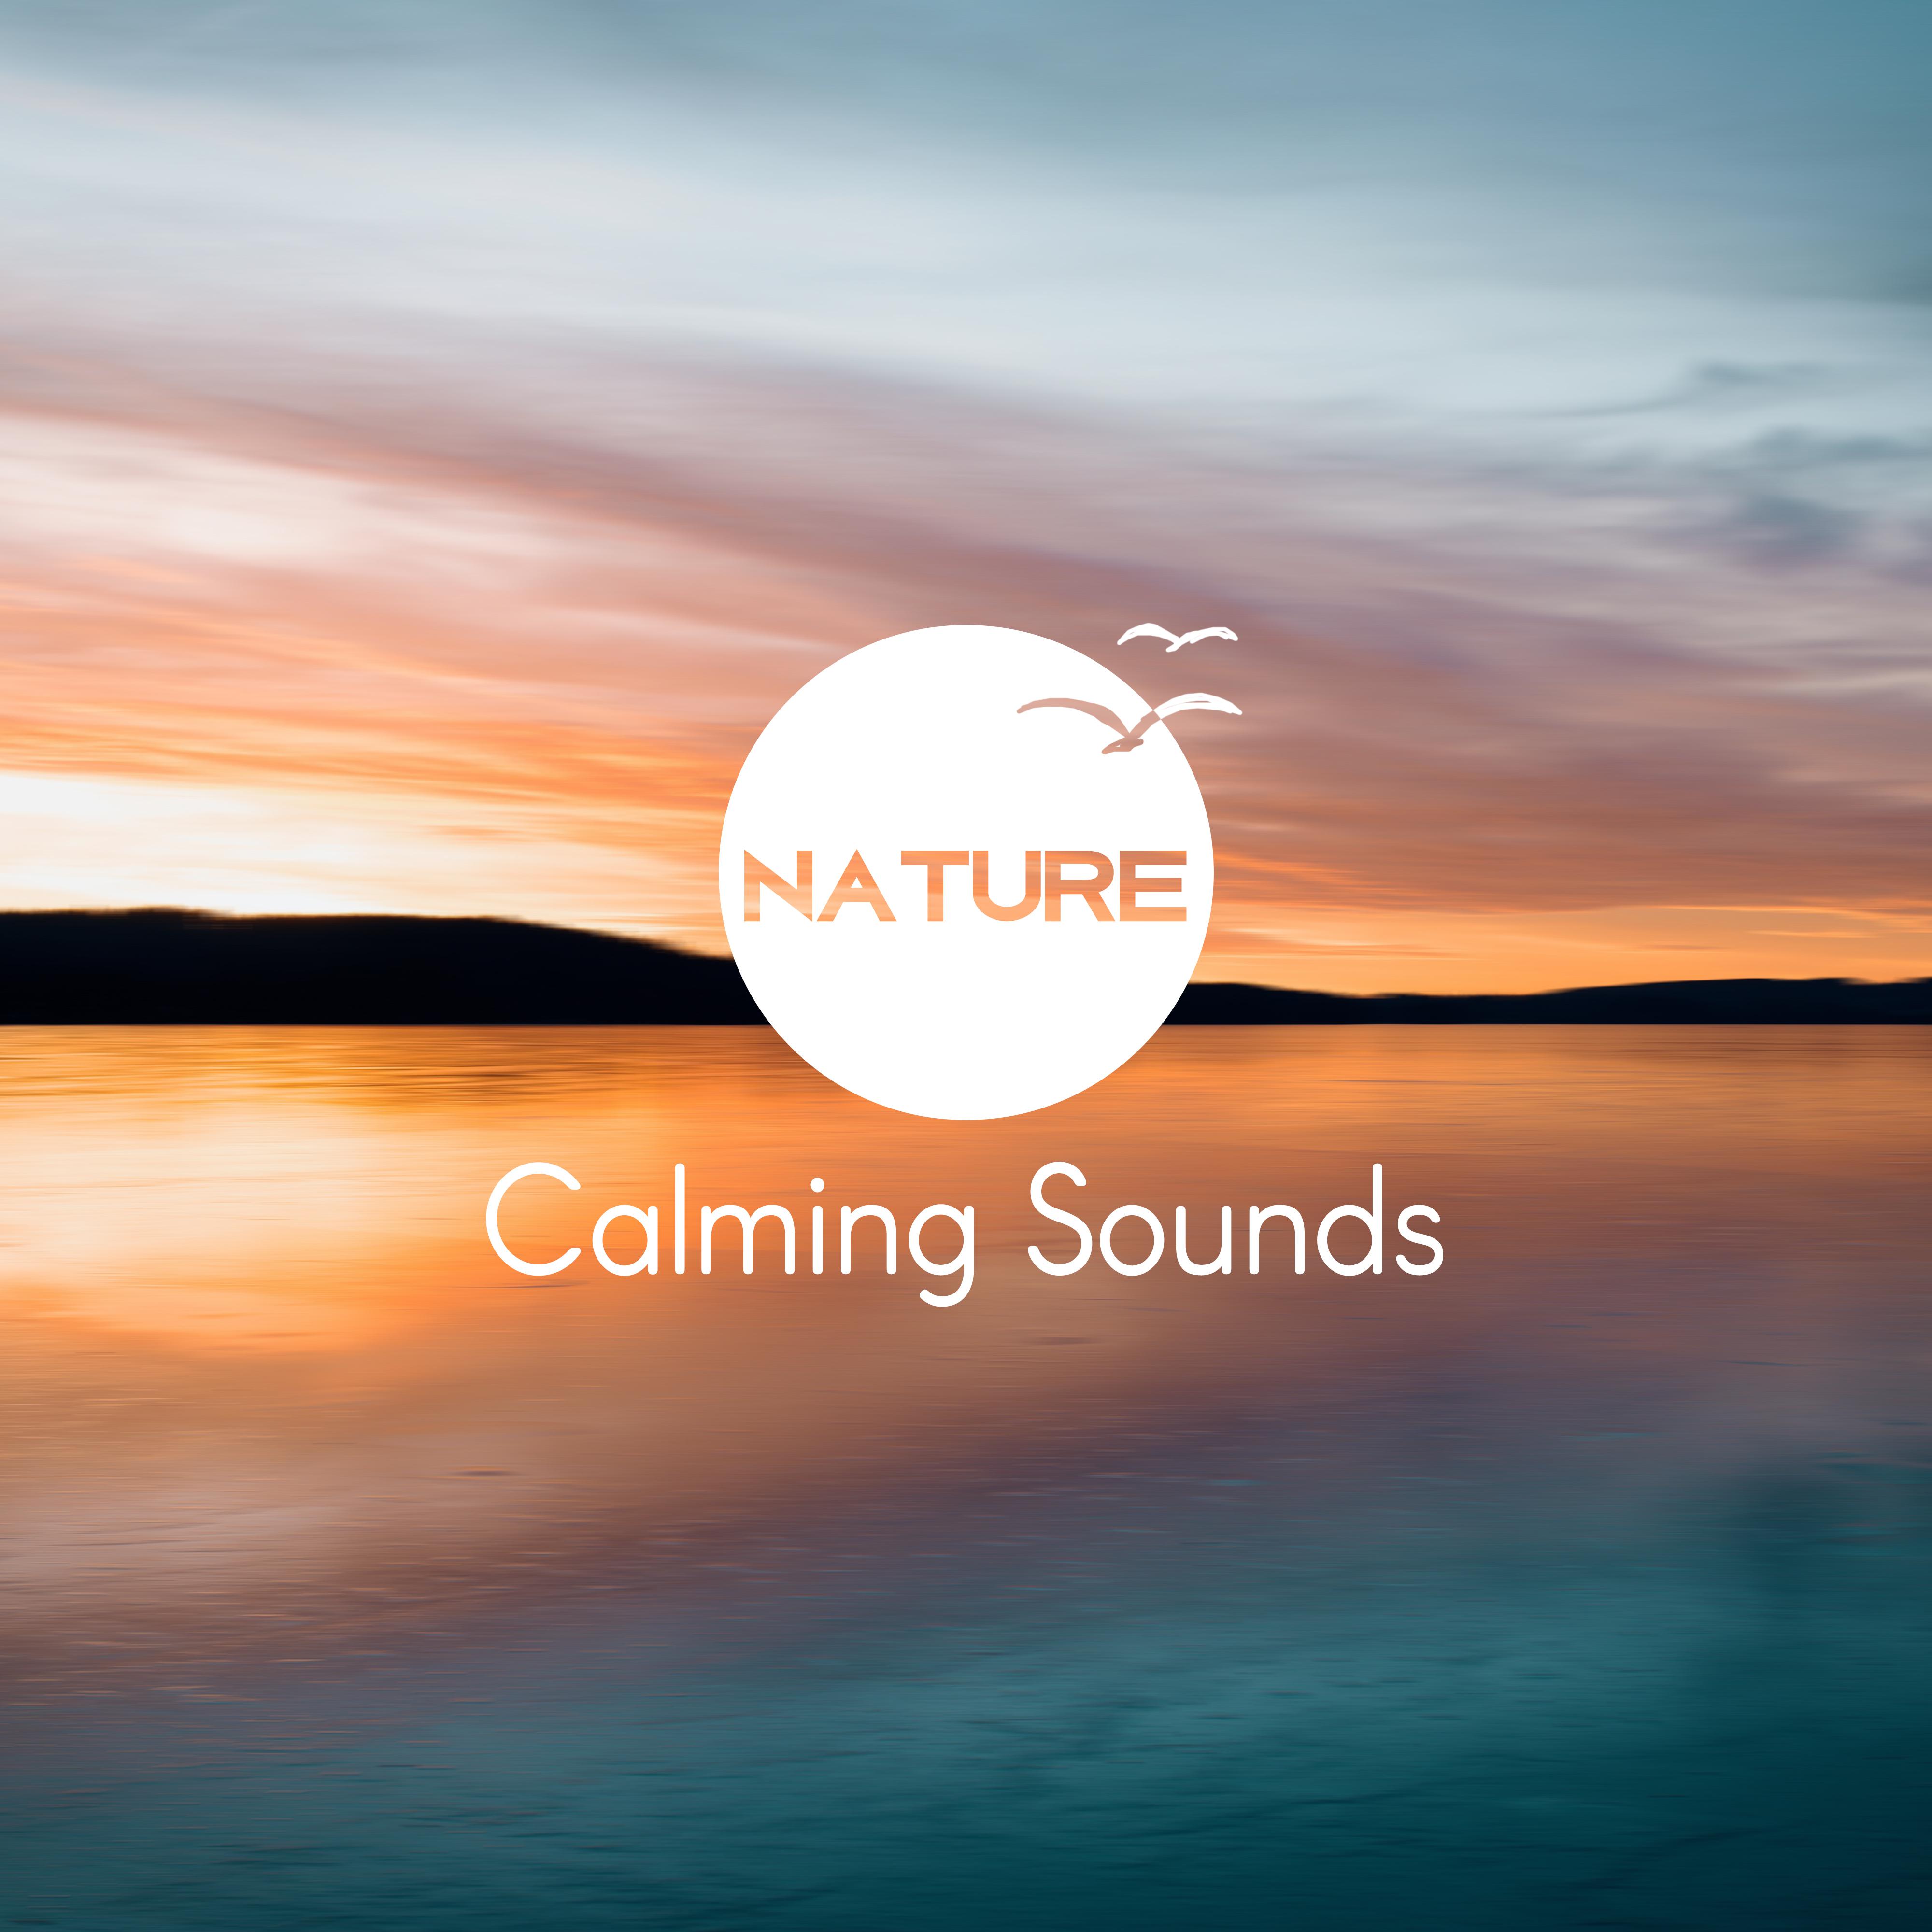 Nature Calming Sounds  Music to Relax, Sounds to Rest, New Age Calmness, Soft Ocean Waves